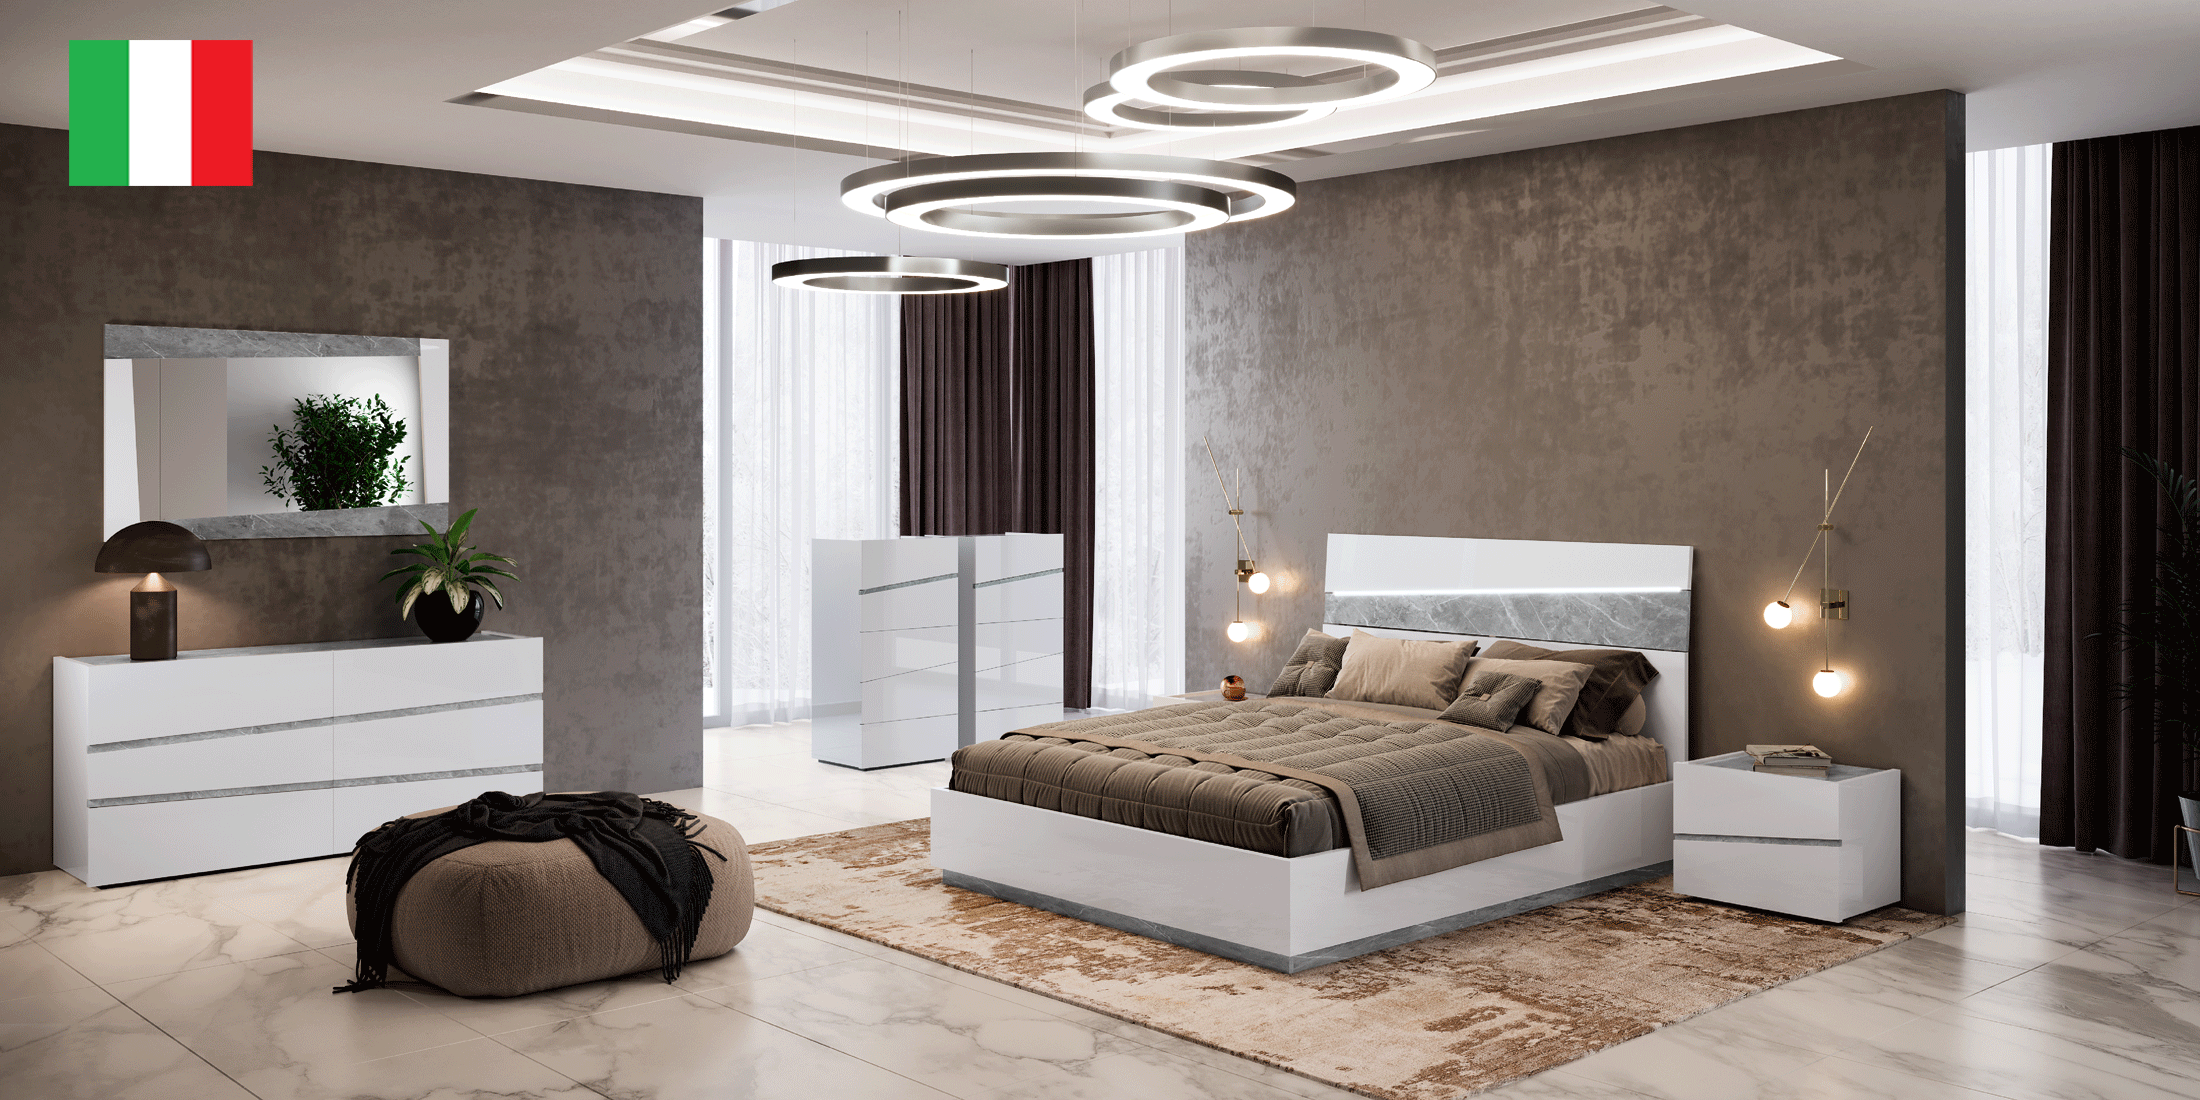 Brands Camel Classic Collection, Italy Alba Bedroom w/ Light by Camelgroup – Italy